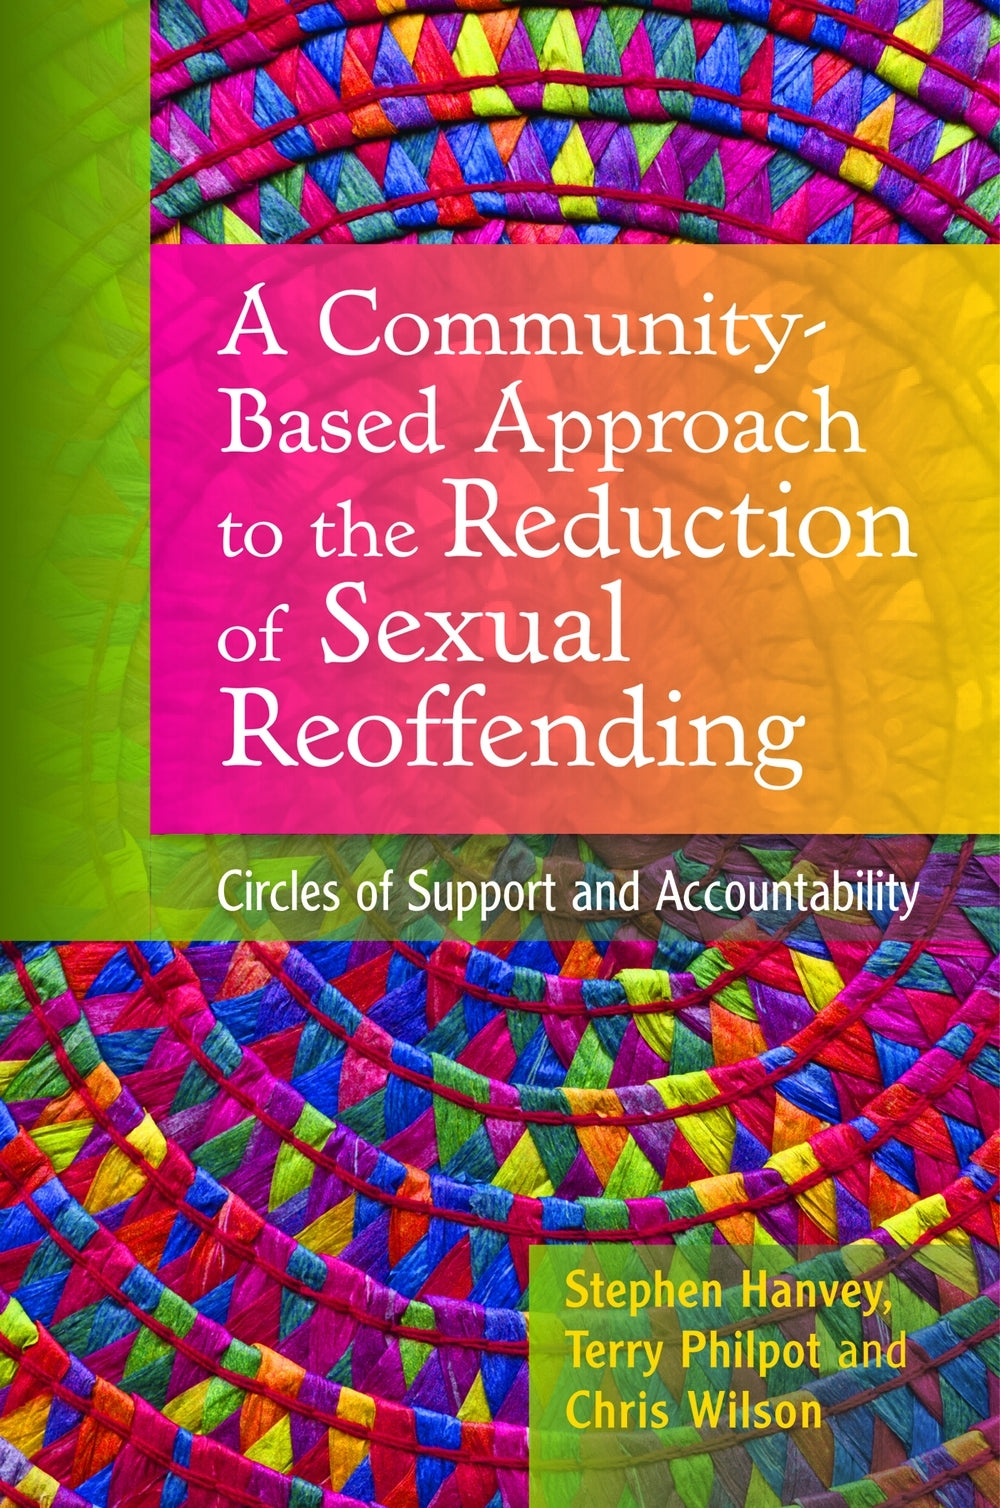 A Community-Based Approach to the Reduction of Sexual Reoffending by Terry Philpot, Stephen Hanvey, Chris Wilson